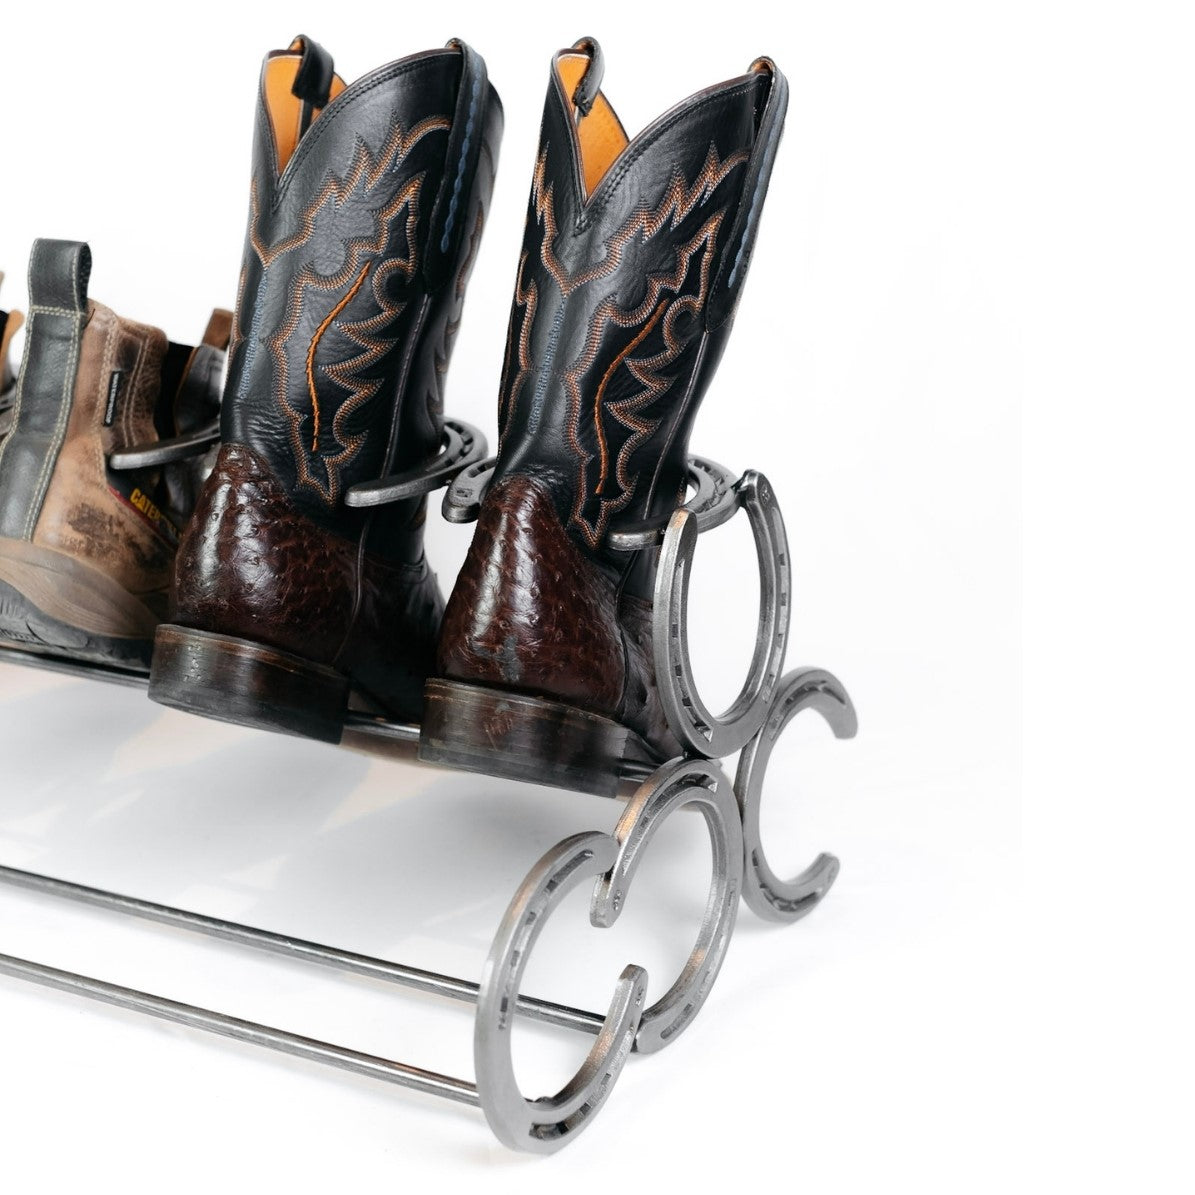 Two Tier Horseshoe Boot/shoe Rack. Four Pair Boot/shoe Rack. Boot Rack. Shoe  Rack. Shoes and Boots FREE Fed Ex SHIPPING LOWER 48 